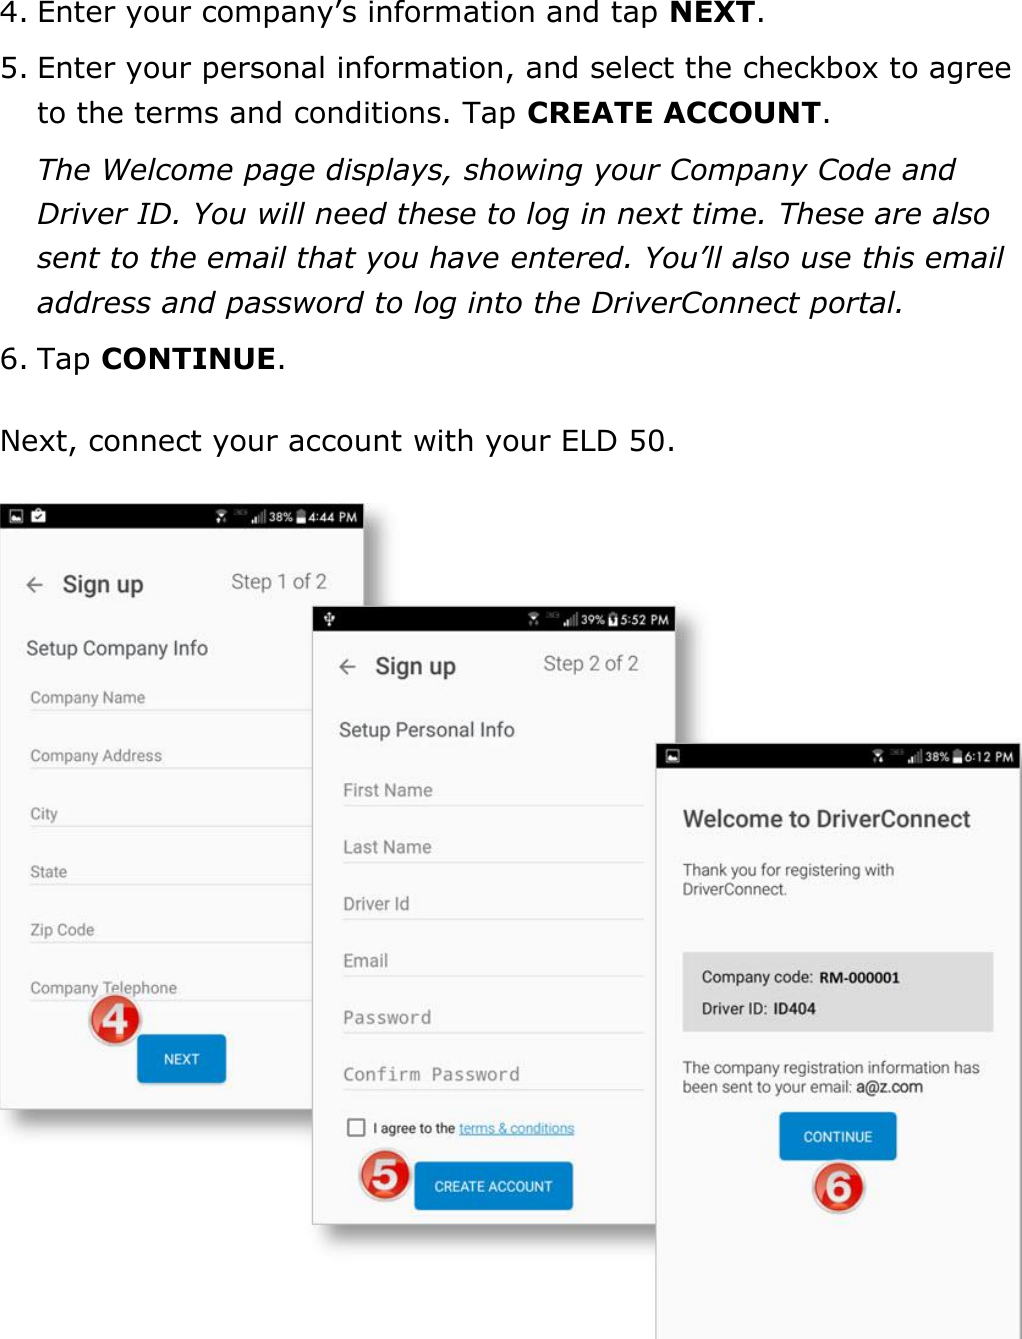 Set My Duty Status DriverConnect User Guide  9 © 2016-2017, Rand McNally, Inc. 4. Enter your company’s information and tap NEXT. 5. Enter your personal information, and select the checkbox to agree to the terms and conditions. Tap CREATE ACCOUNT. The Welcome page displays, showing your Company Code and Driver ID. You will need these to log in next time. These are also sent to the email that you have entered. You’ll also use this email address and password to log into the DriverConnect portal. 6. Tap CONTINUE. Next, connect your account with your ELD 50.  